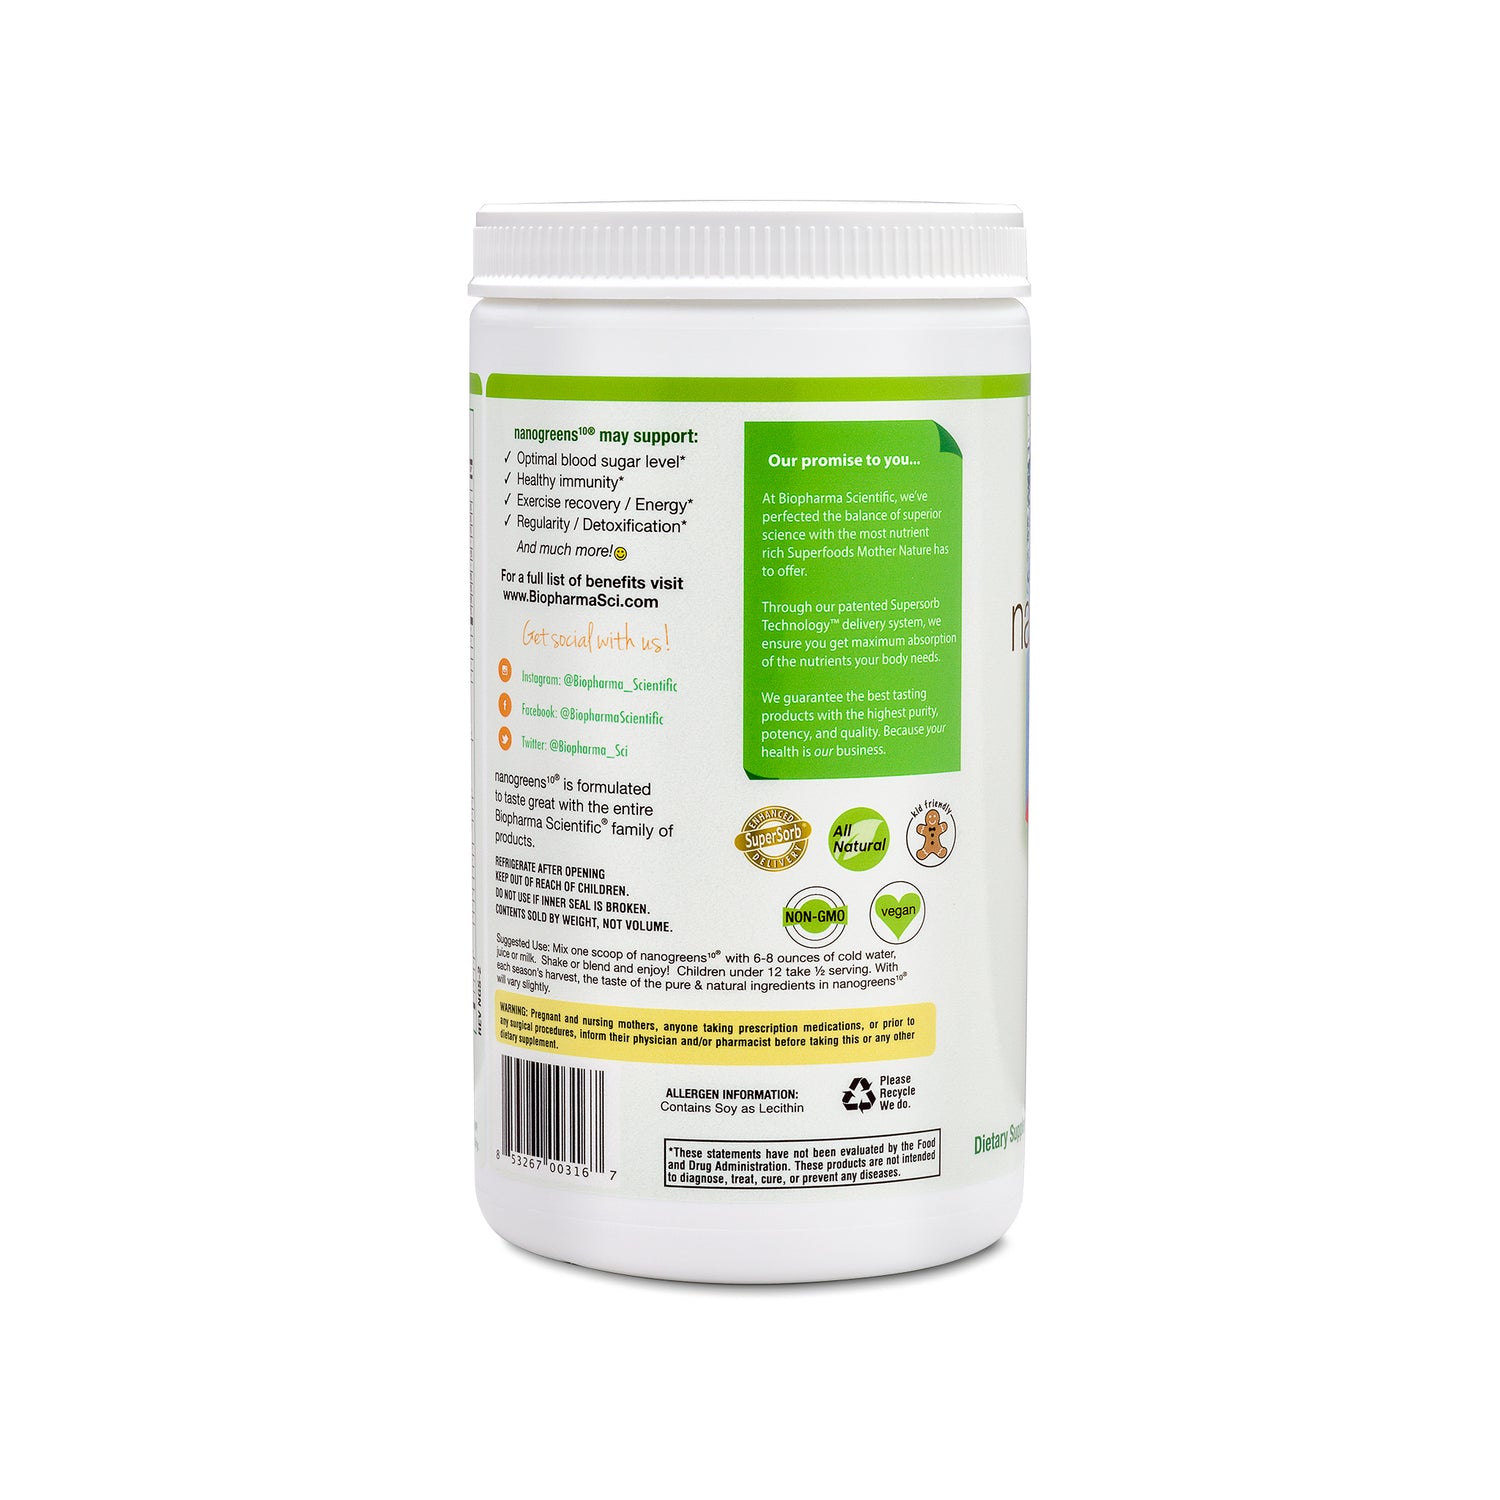 nanogreens strawberry fruit and vegetable superfood powder supplement - side with additional information